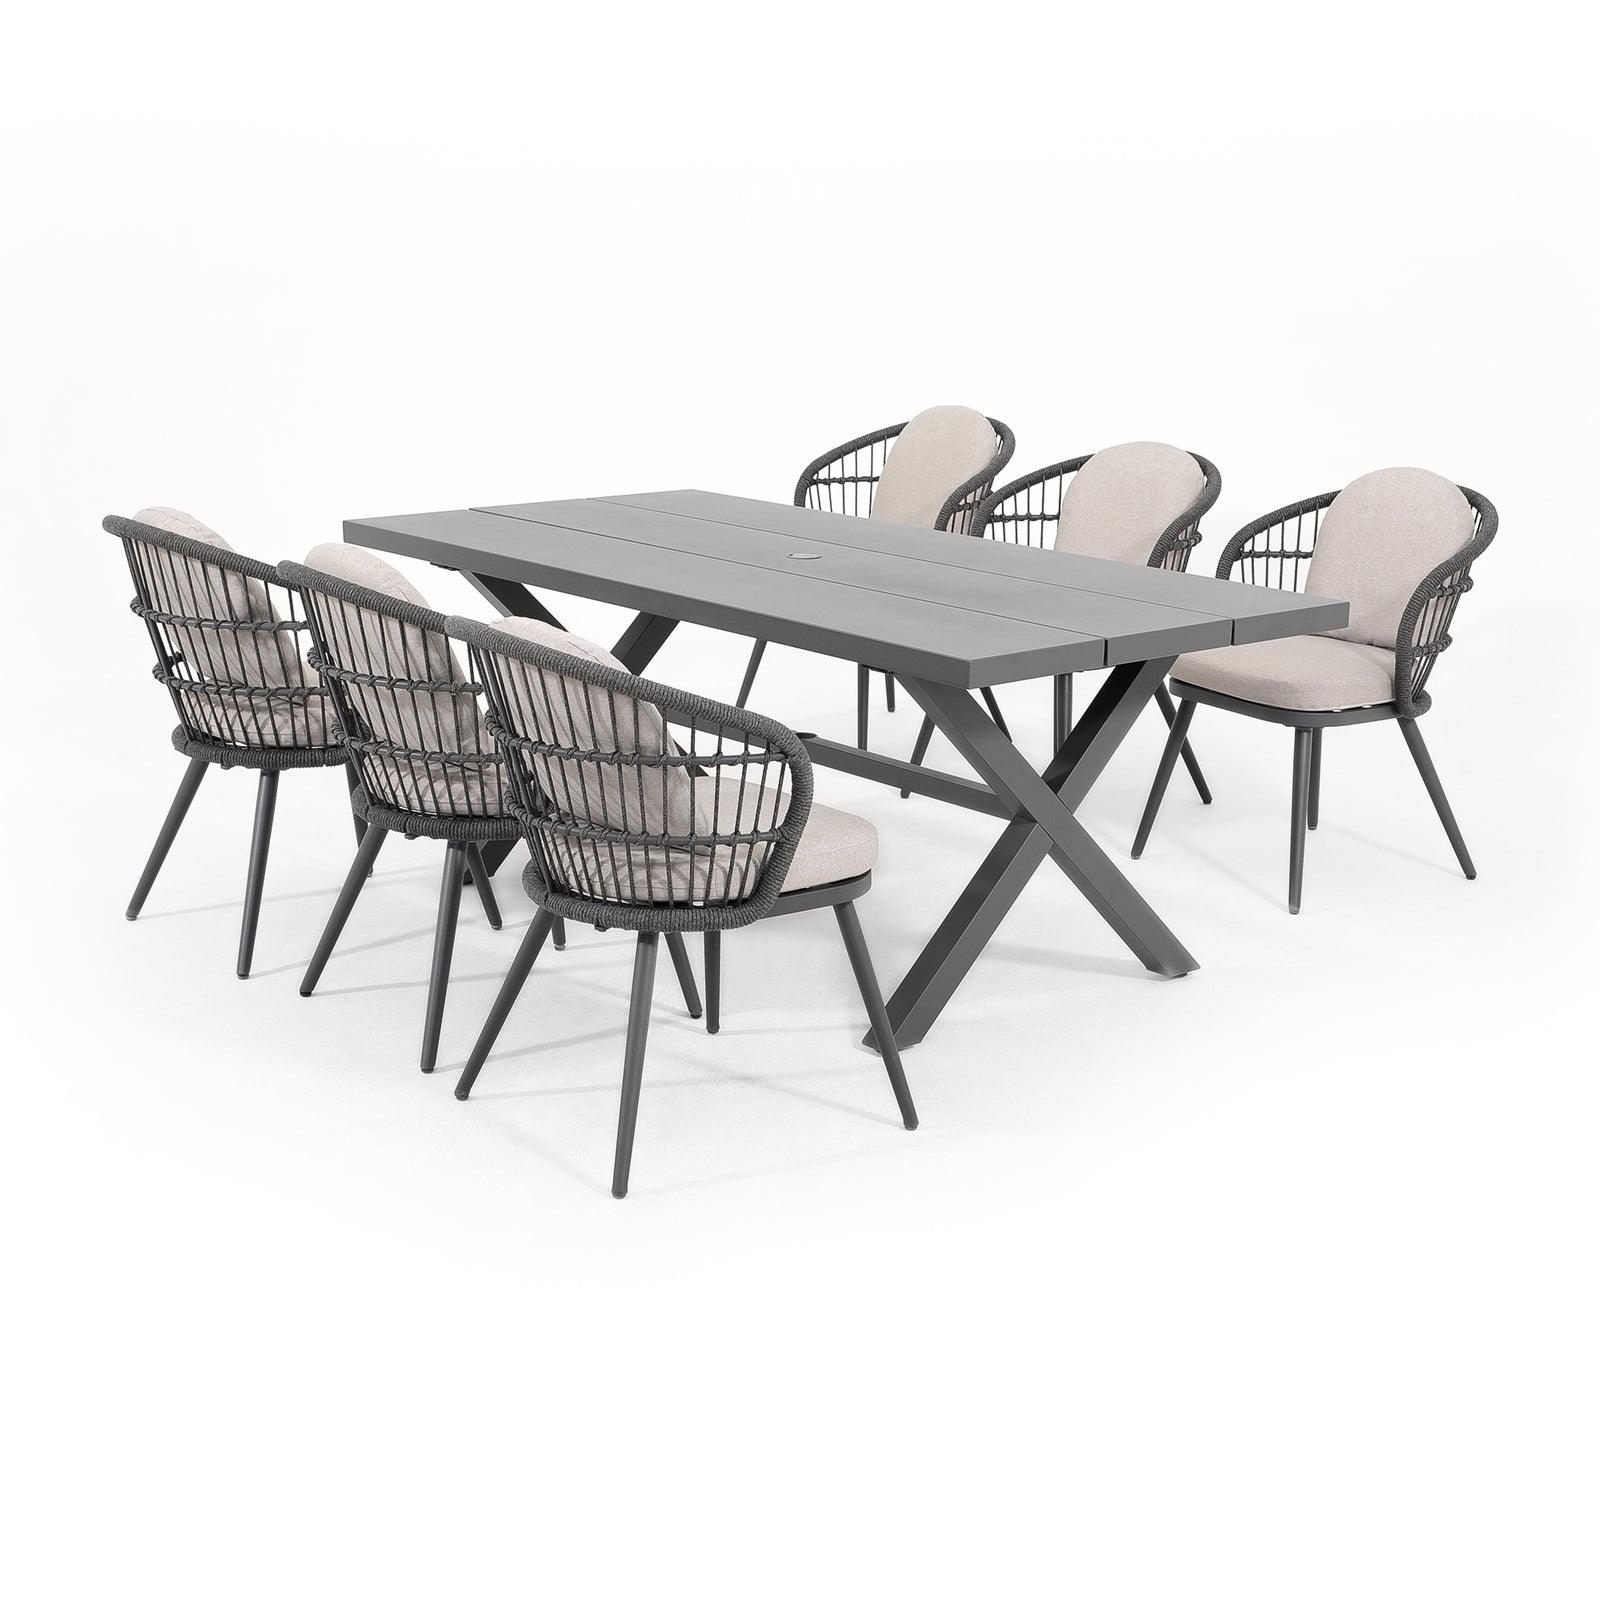 Comino dark grey aluminum outdoor Dining Set for 6 with light grey cushions, 6 dining chairs with backrest rope design, 1 rectangle aluminum dining table with x-shaped legs - Jardina Furniture#Pieces_7-pc.